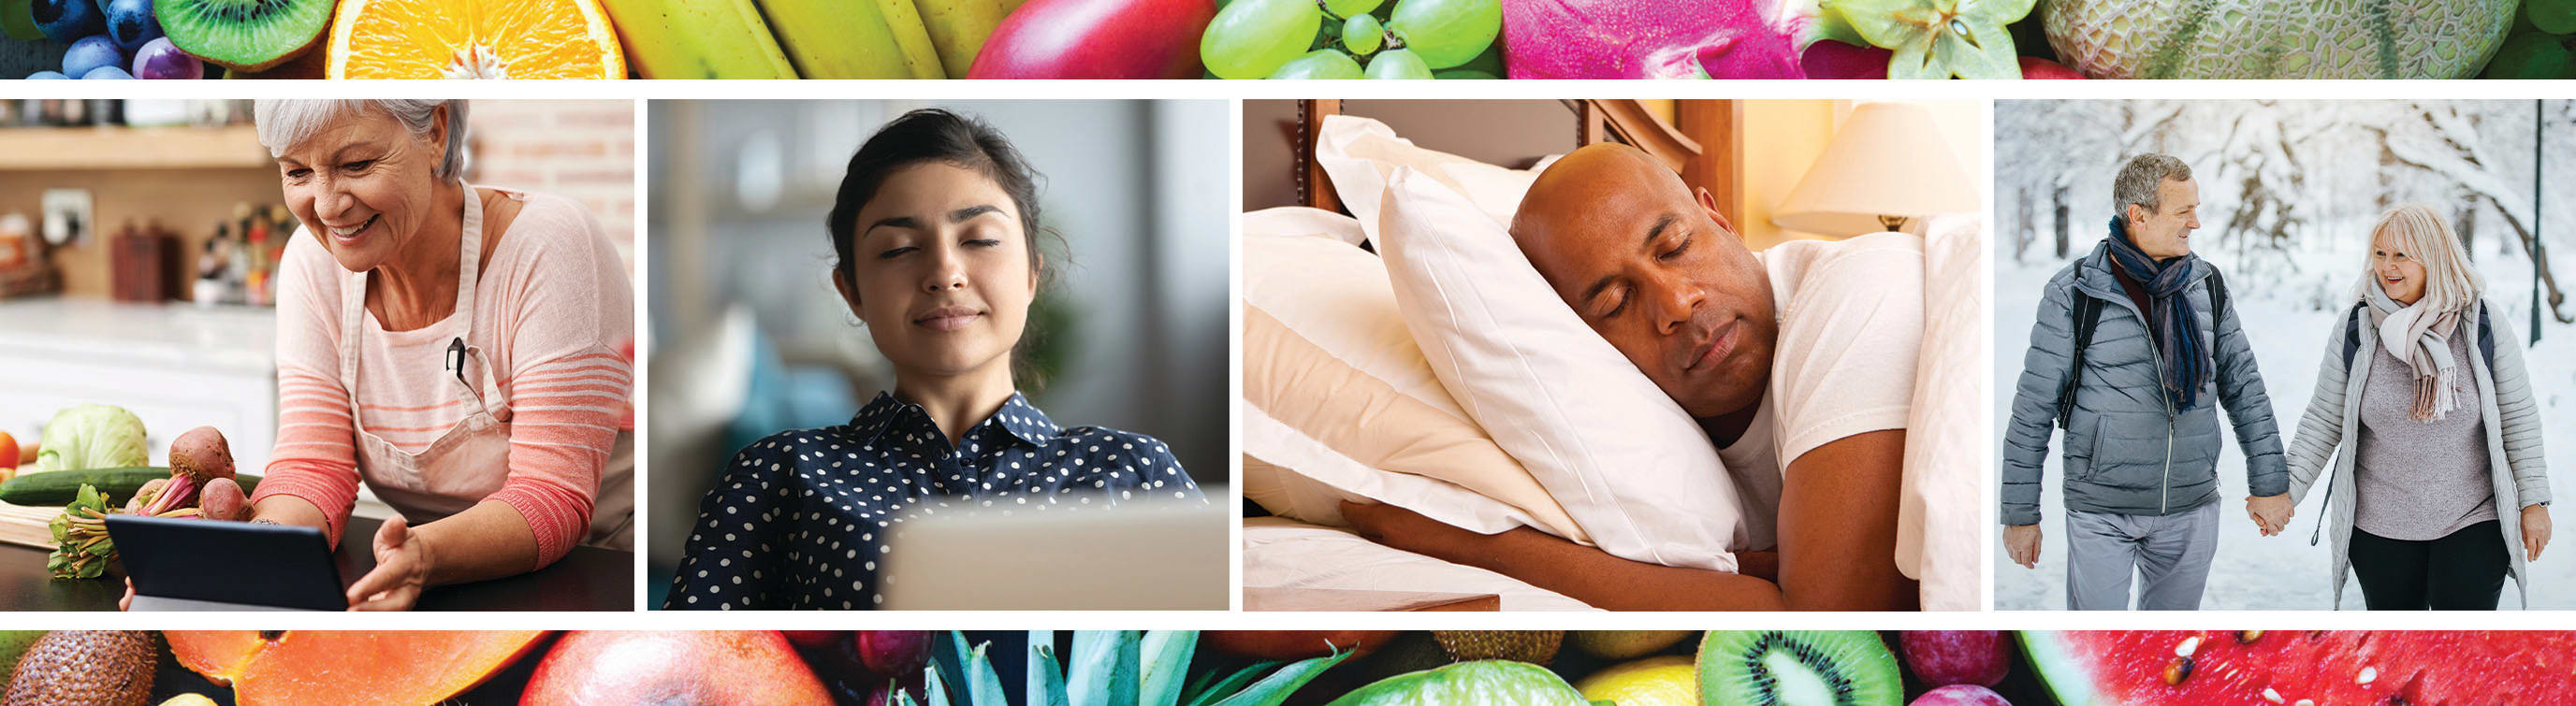 Healthy eating, relaxation, sleep and exercise are key in lifestyle medicine.